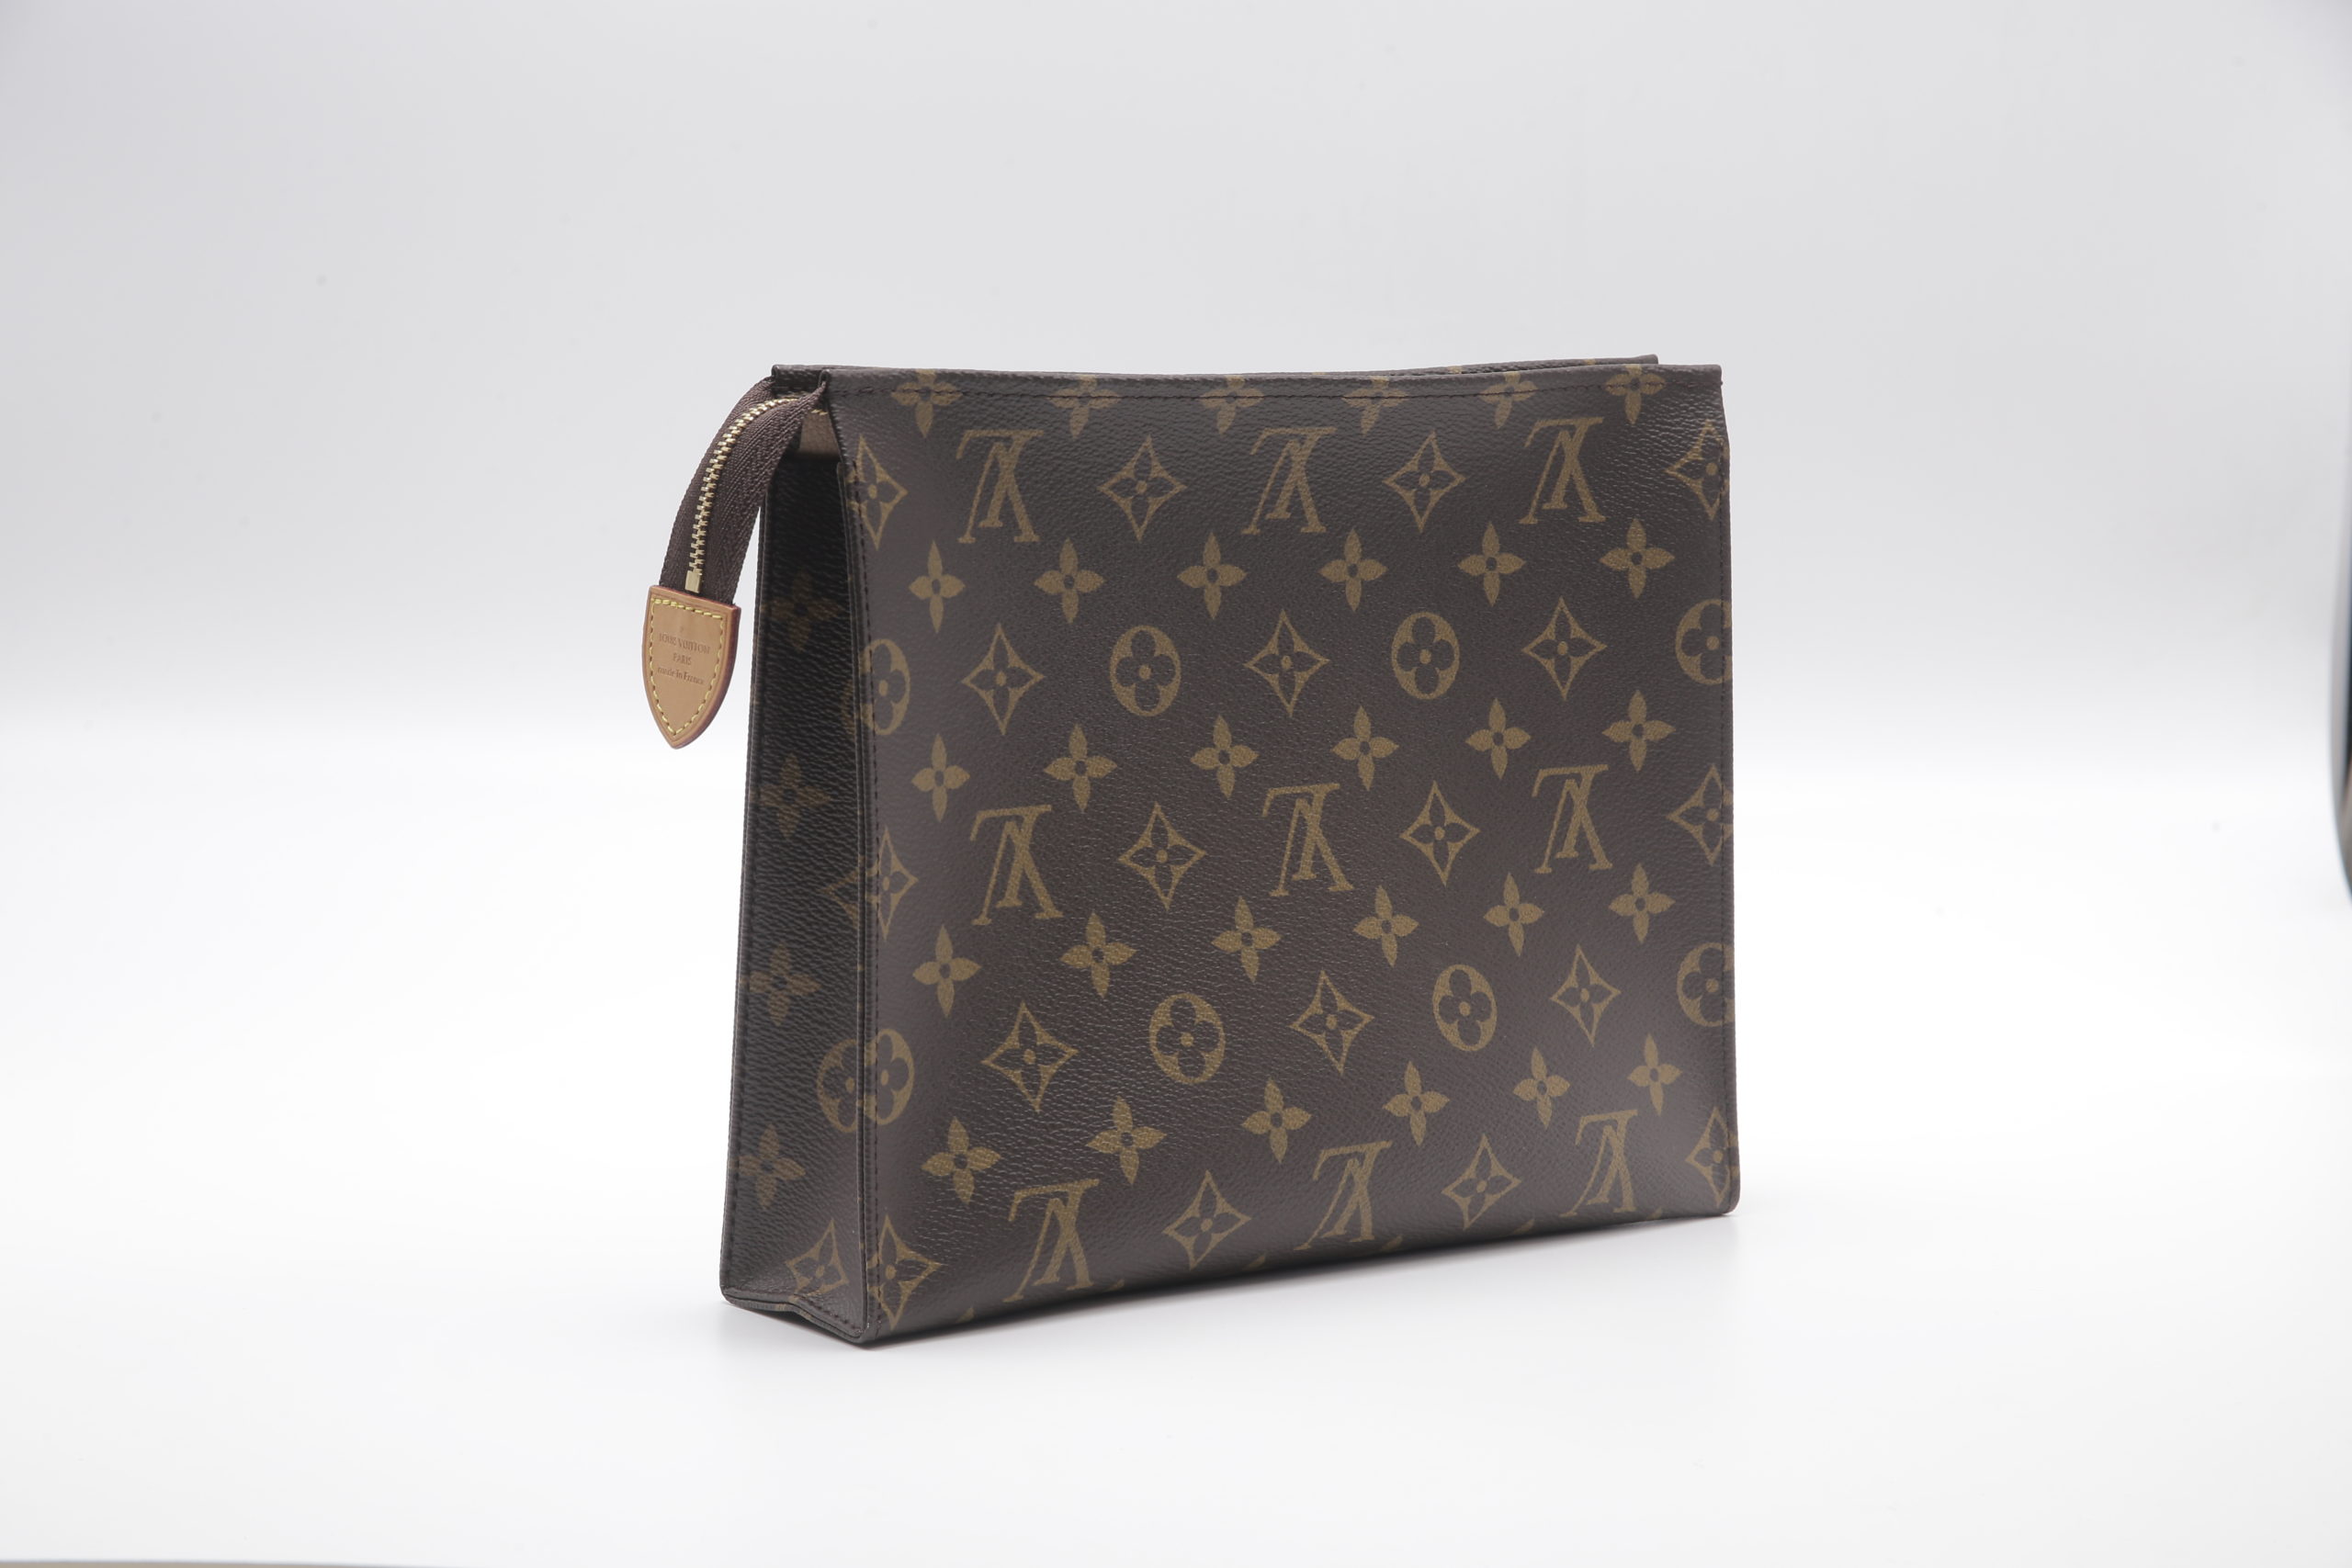 Louis Vuitton Toiletry Pouch 26 Review 